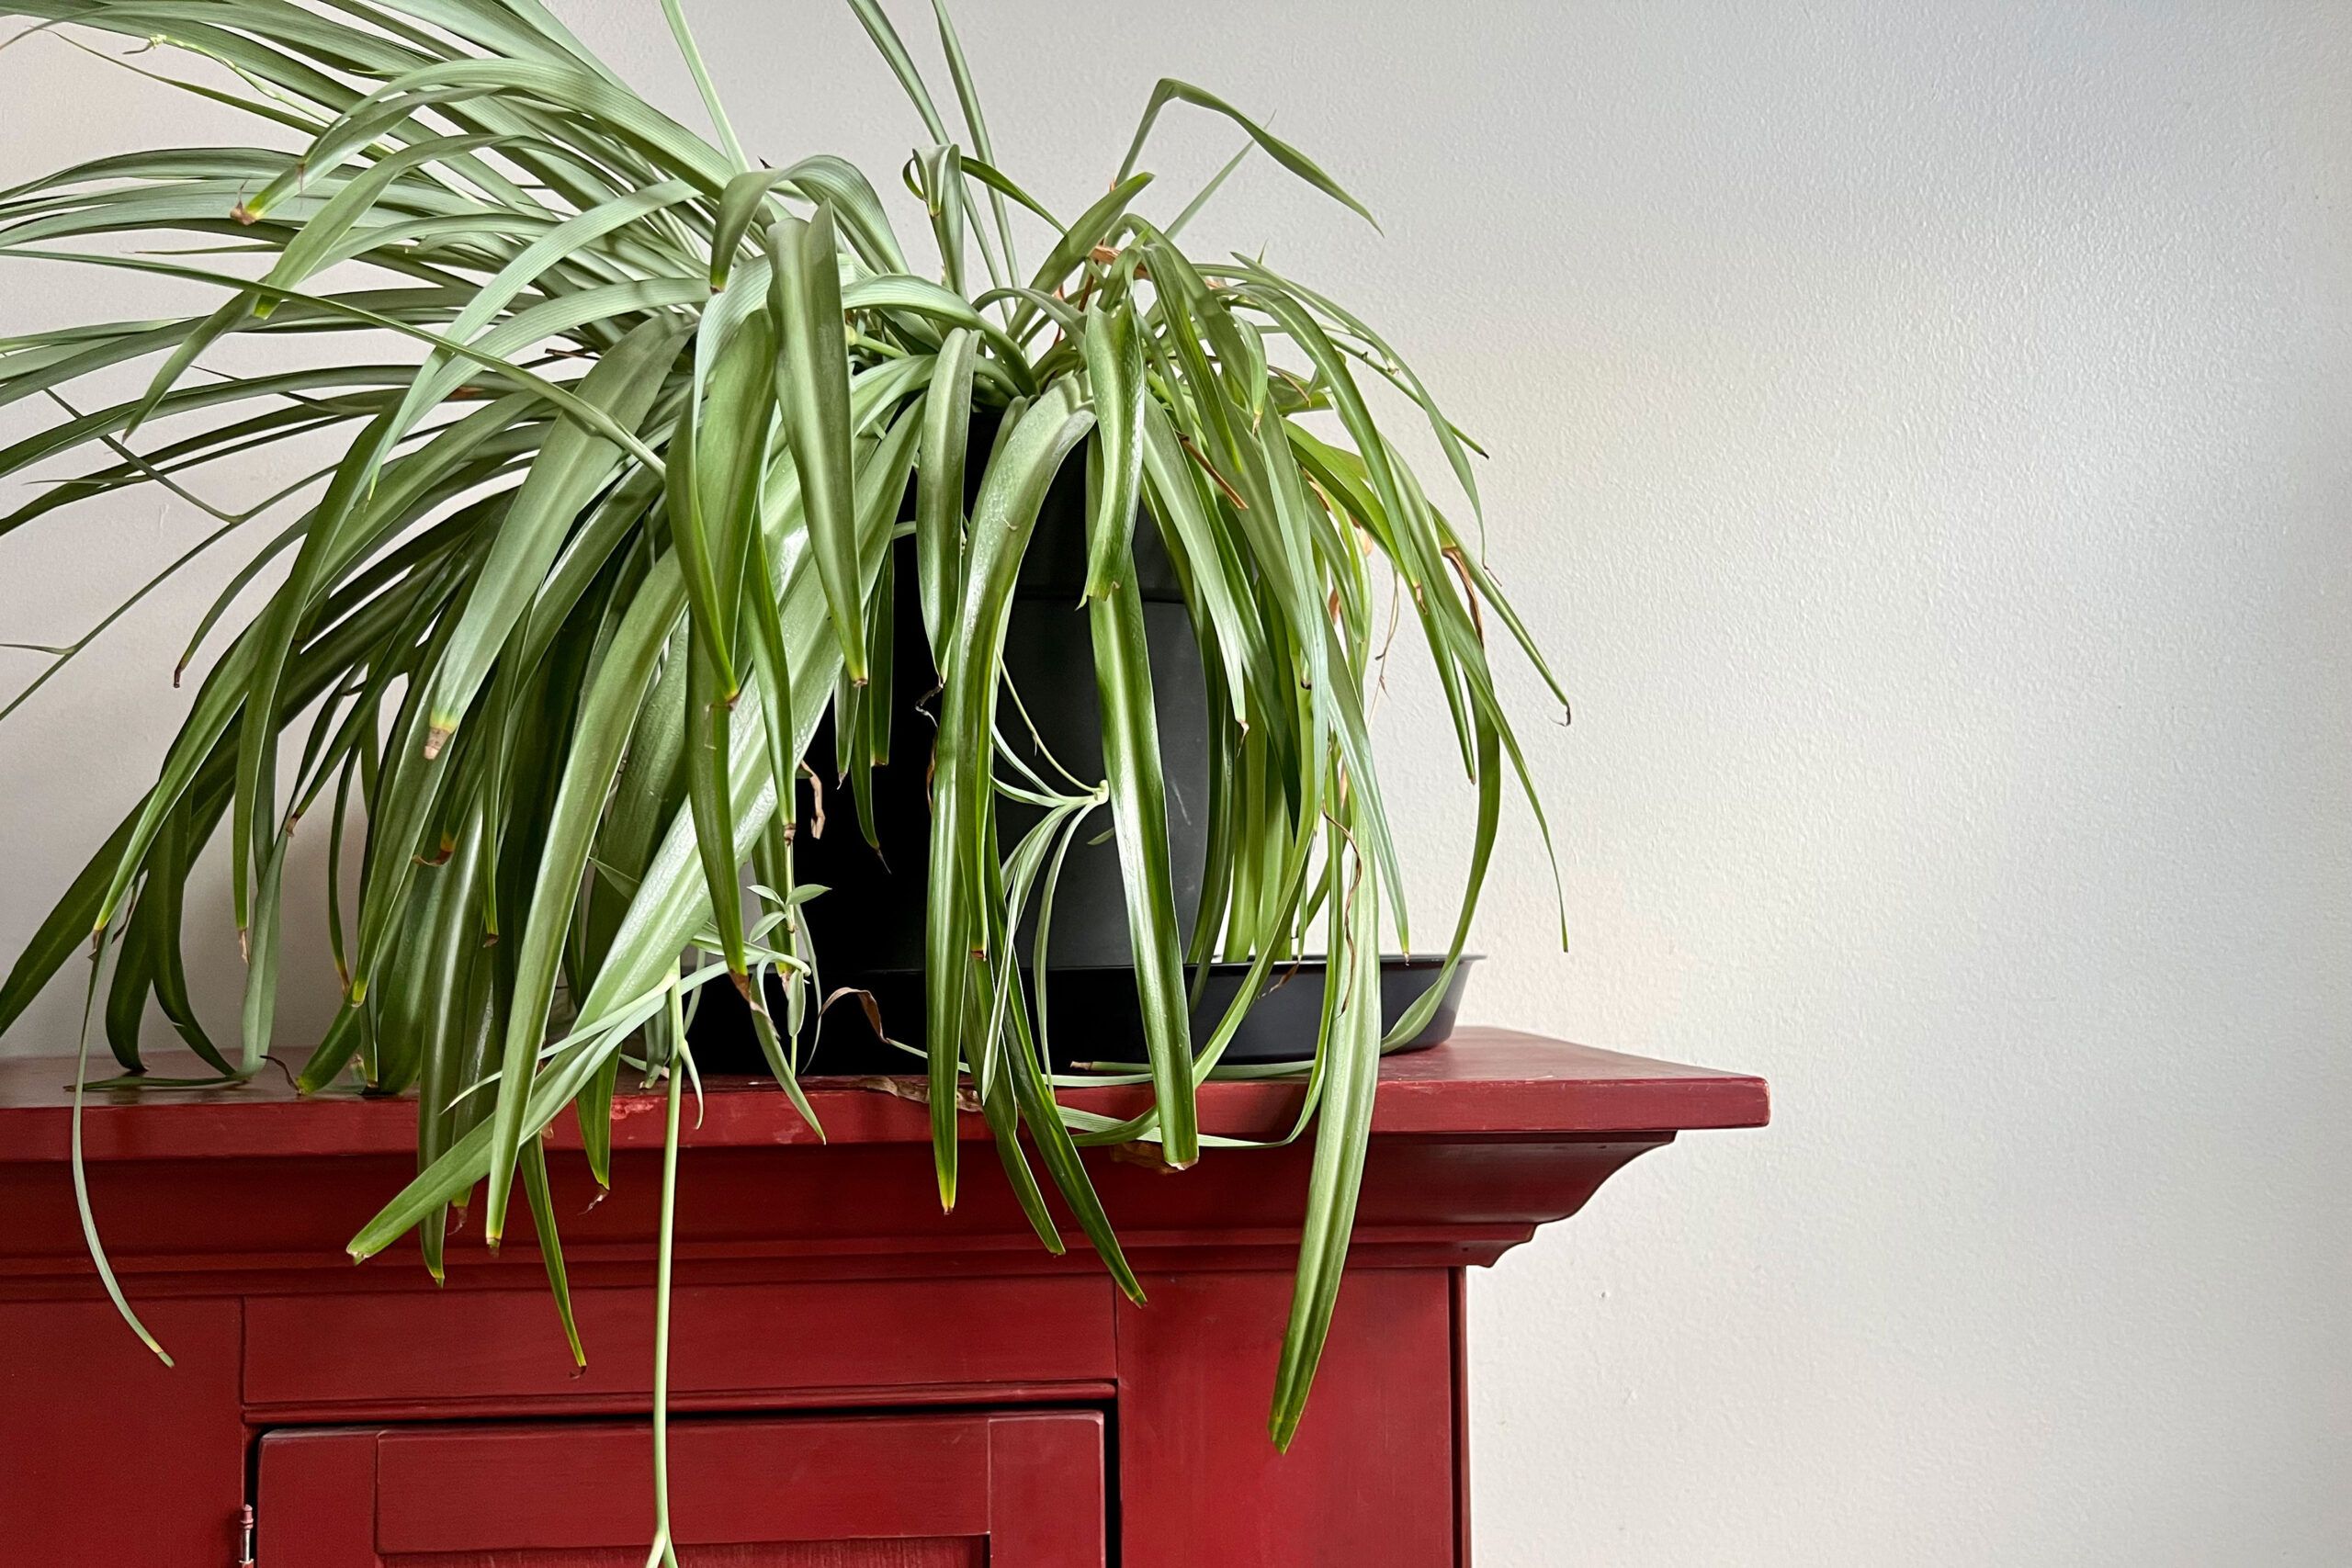 Spider plant on a red shelf